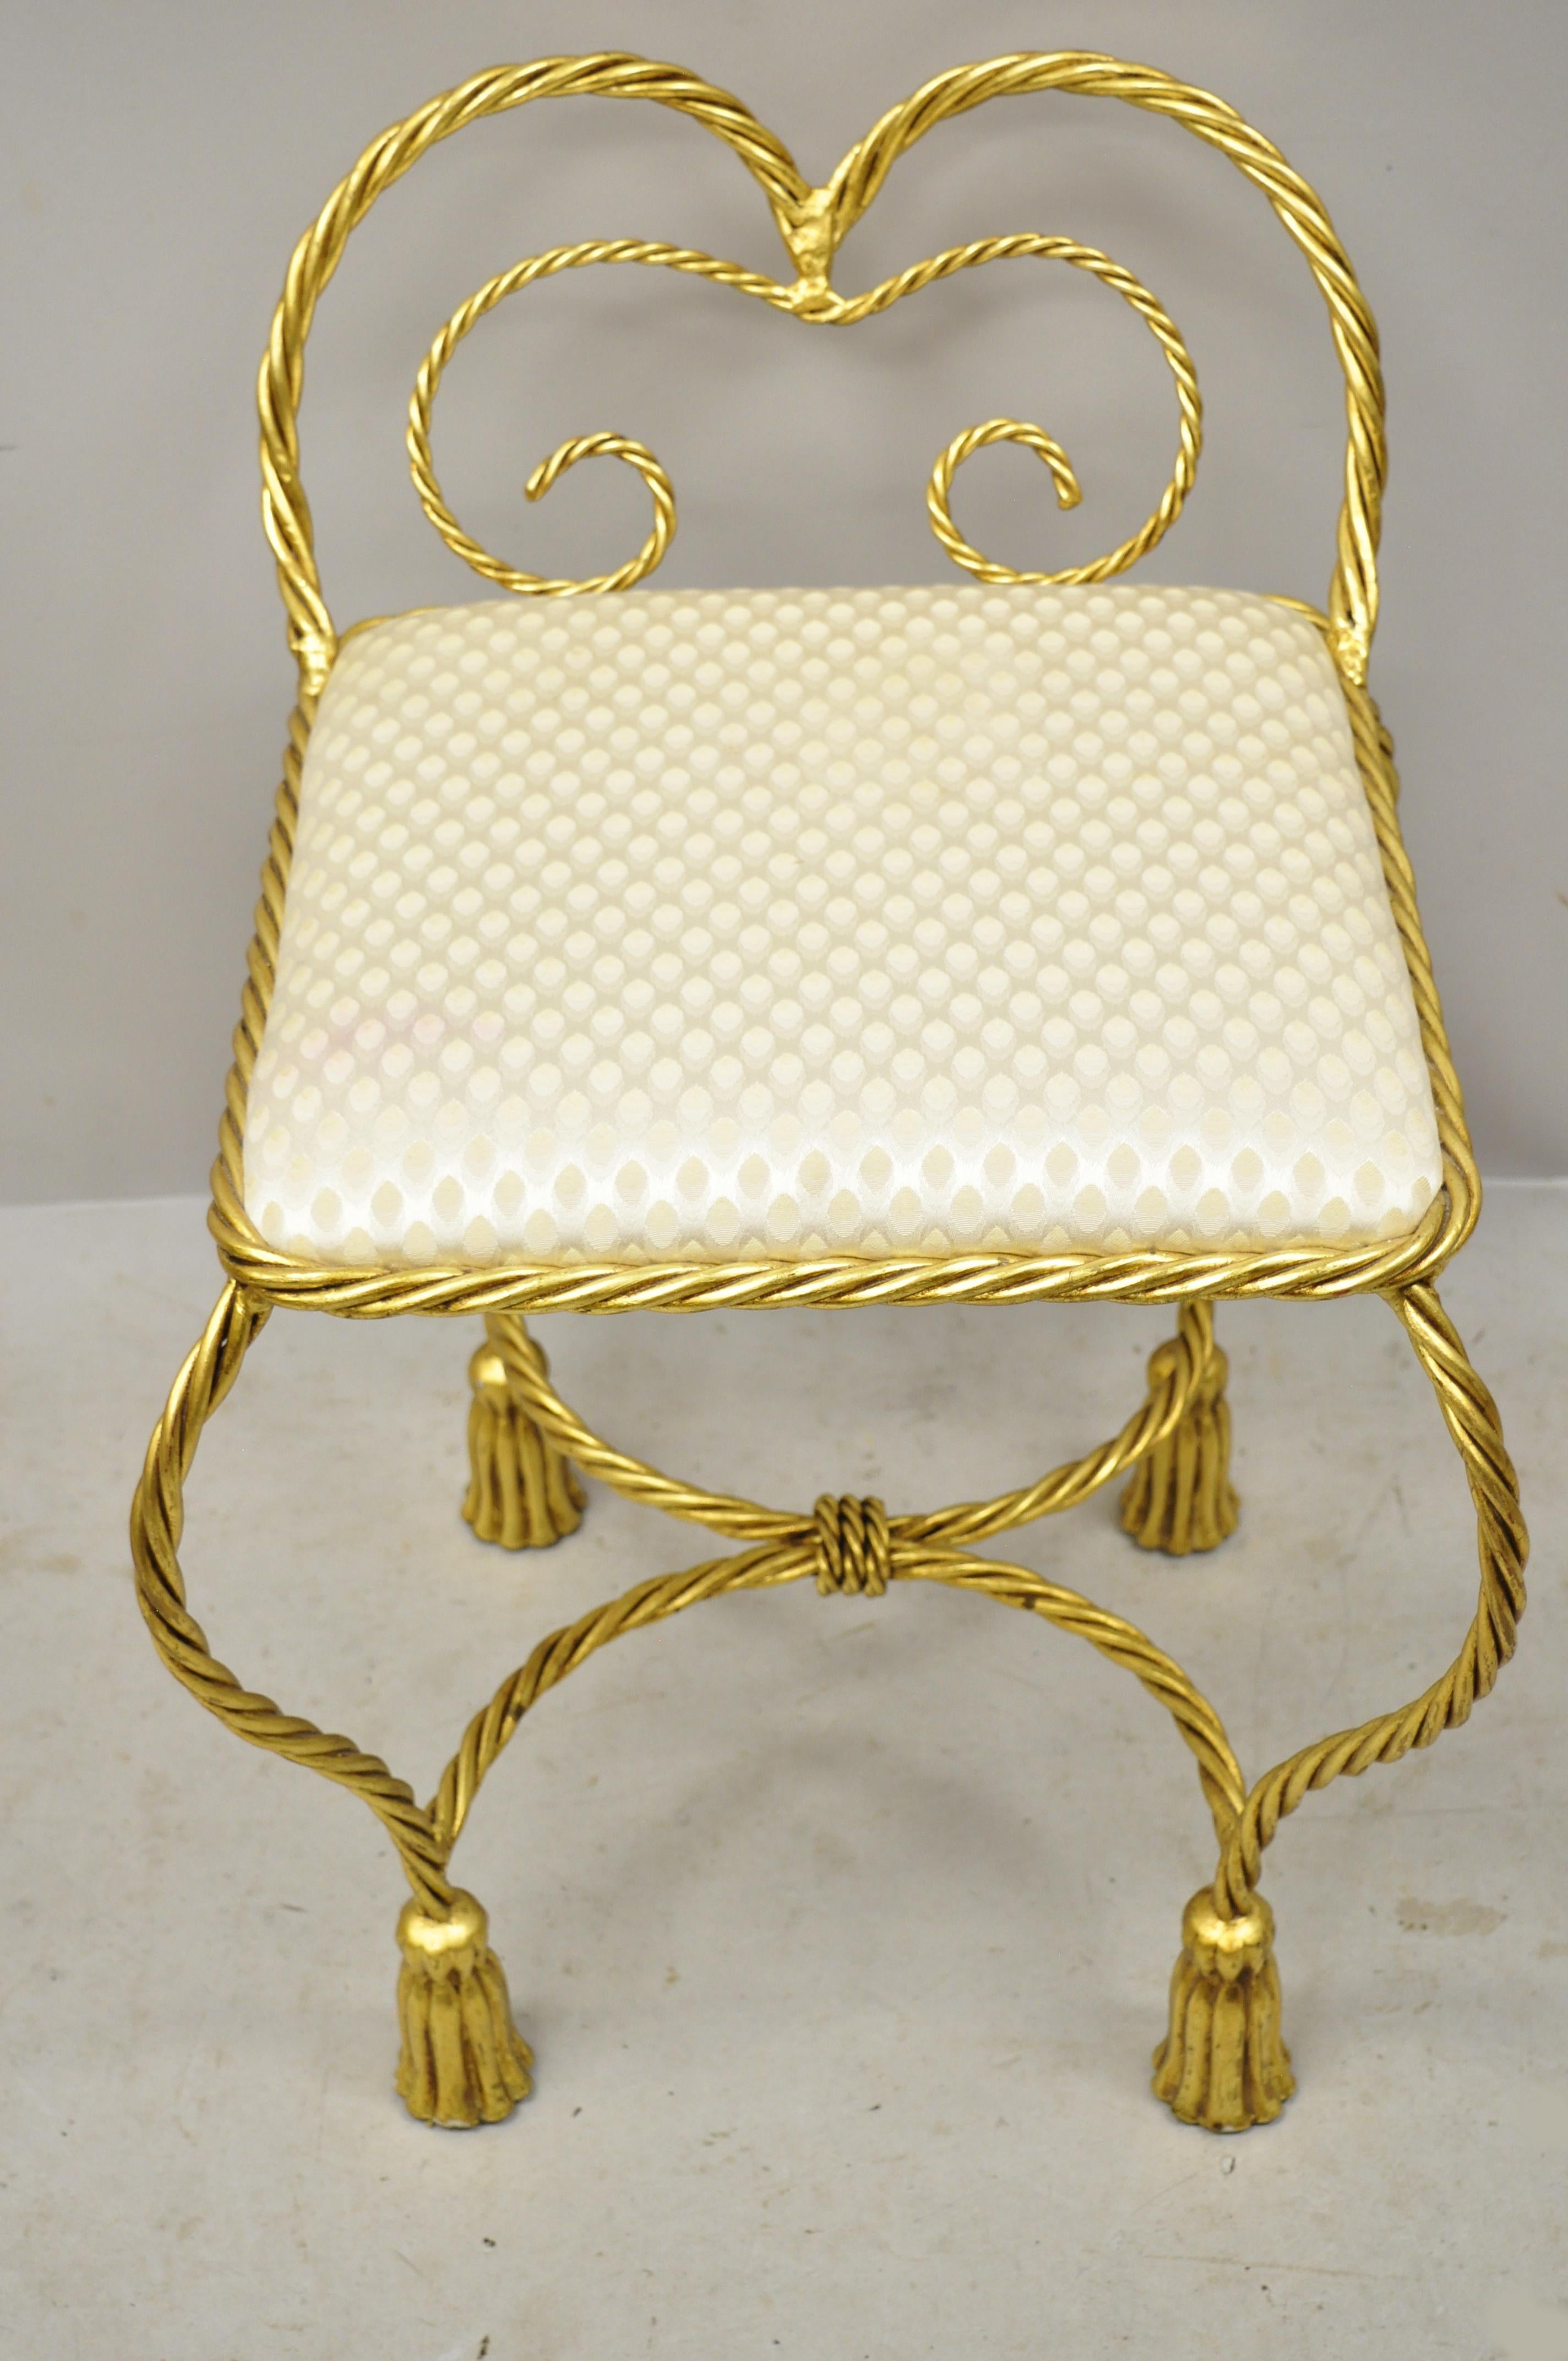 Mid-20th century Italian Hollywood Regency gold gilt iron rope tassel small vanity chair. Item features a gold gilt iron frame, rope and tassel design, upholstered seat, very nice vintage item, great style and form, circa mid-20th century.